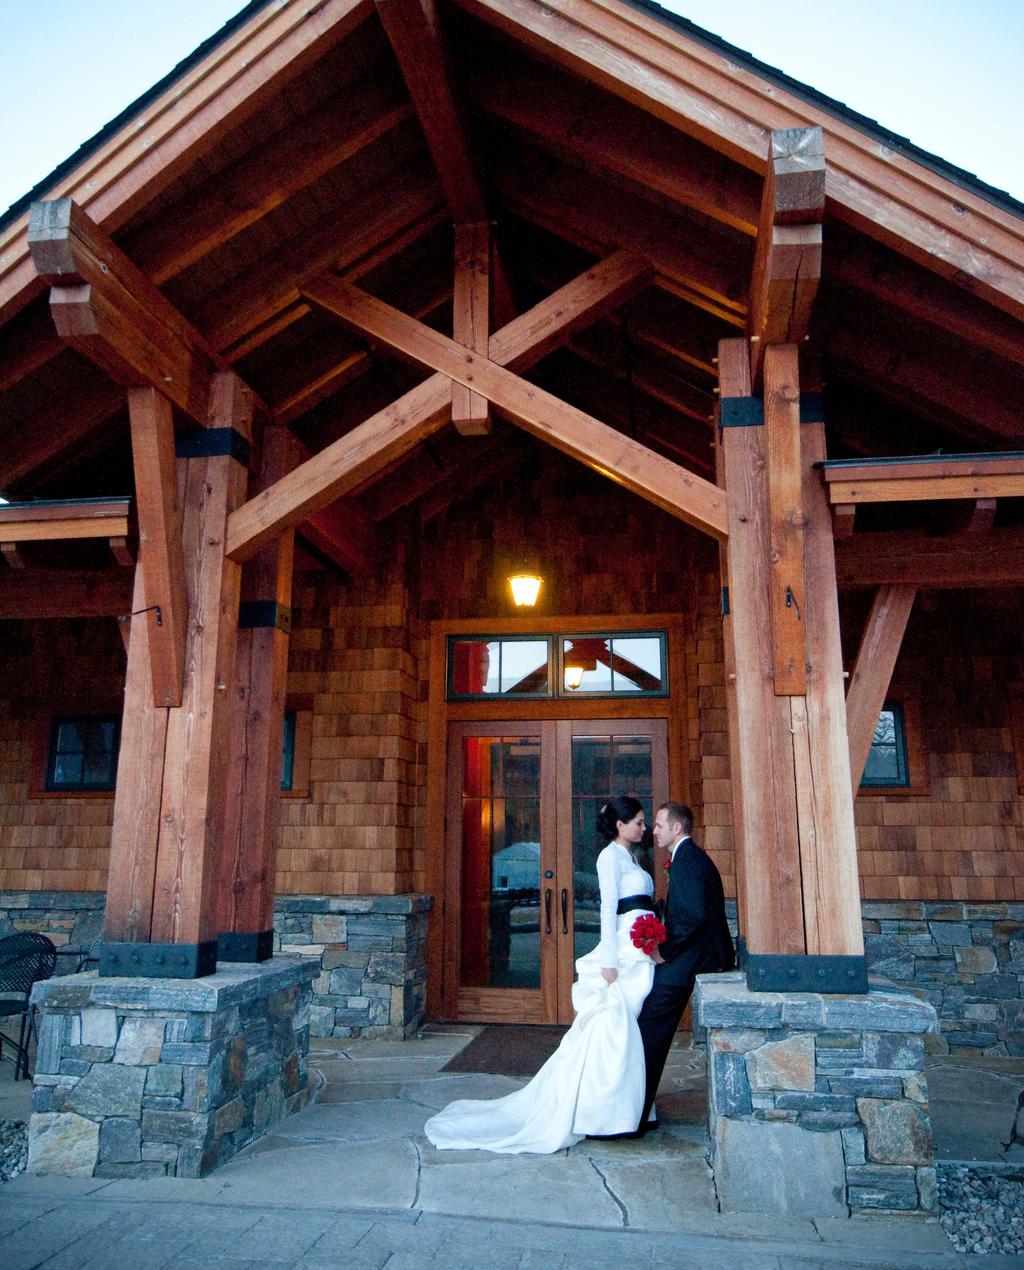 Congratulations! It is time to design your Distinctive Mountain Wedding! The Lodge at Spruce Peak provides a thoughtfully crafted team to cater to your every need.